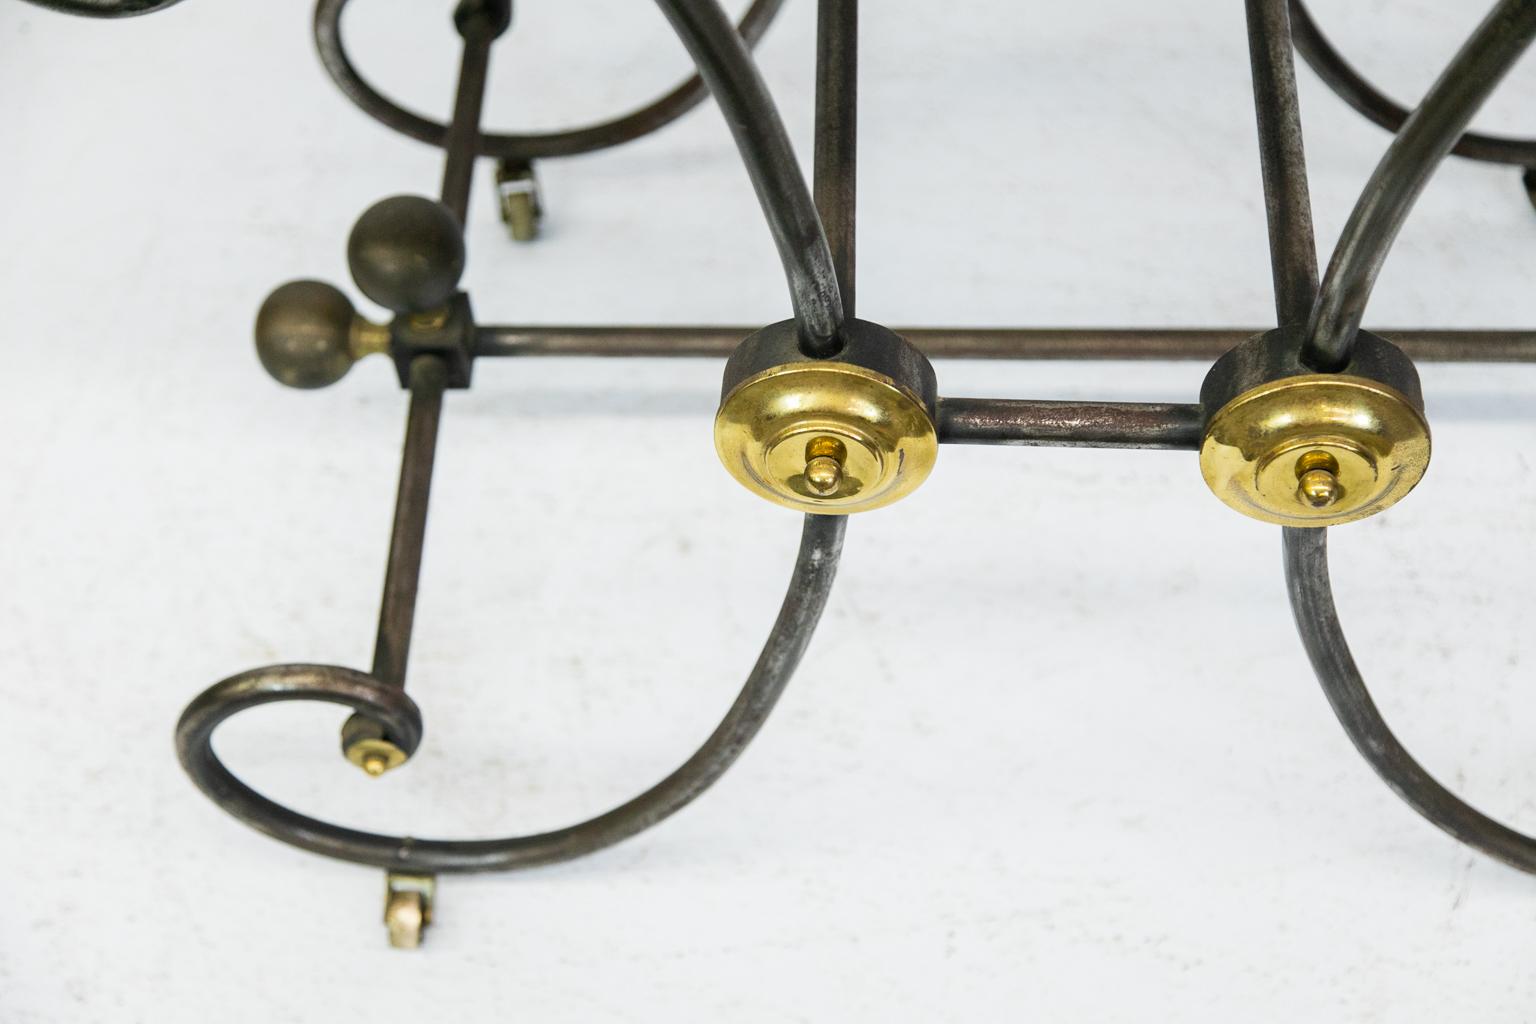 French marble-top Baker’s table, the base is steel with brass highlights on all four sides, and it rests on its four original castors.
 